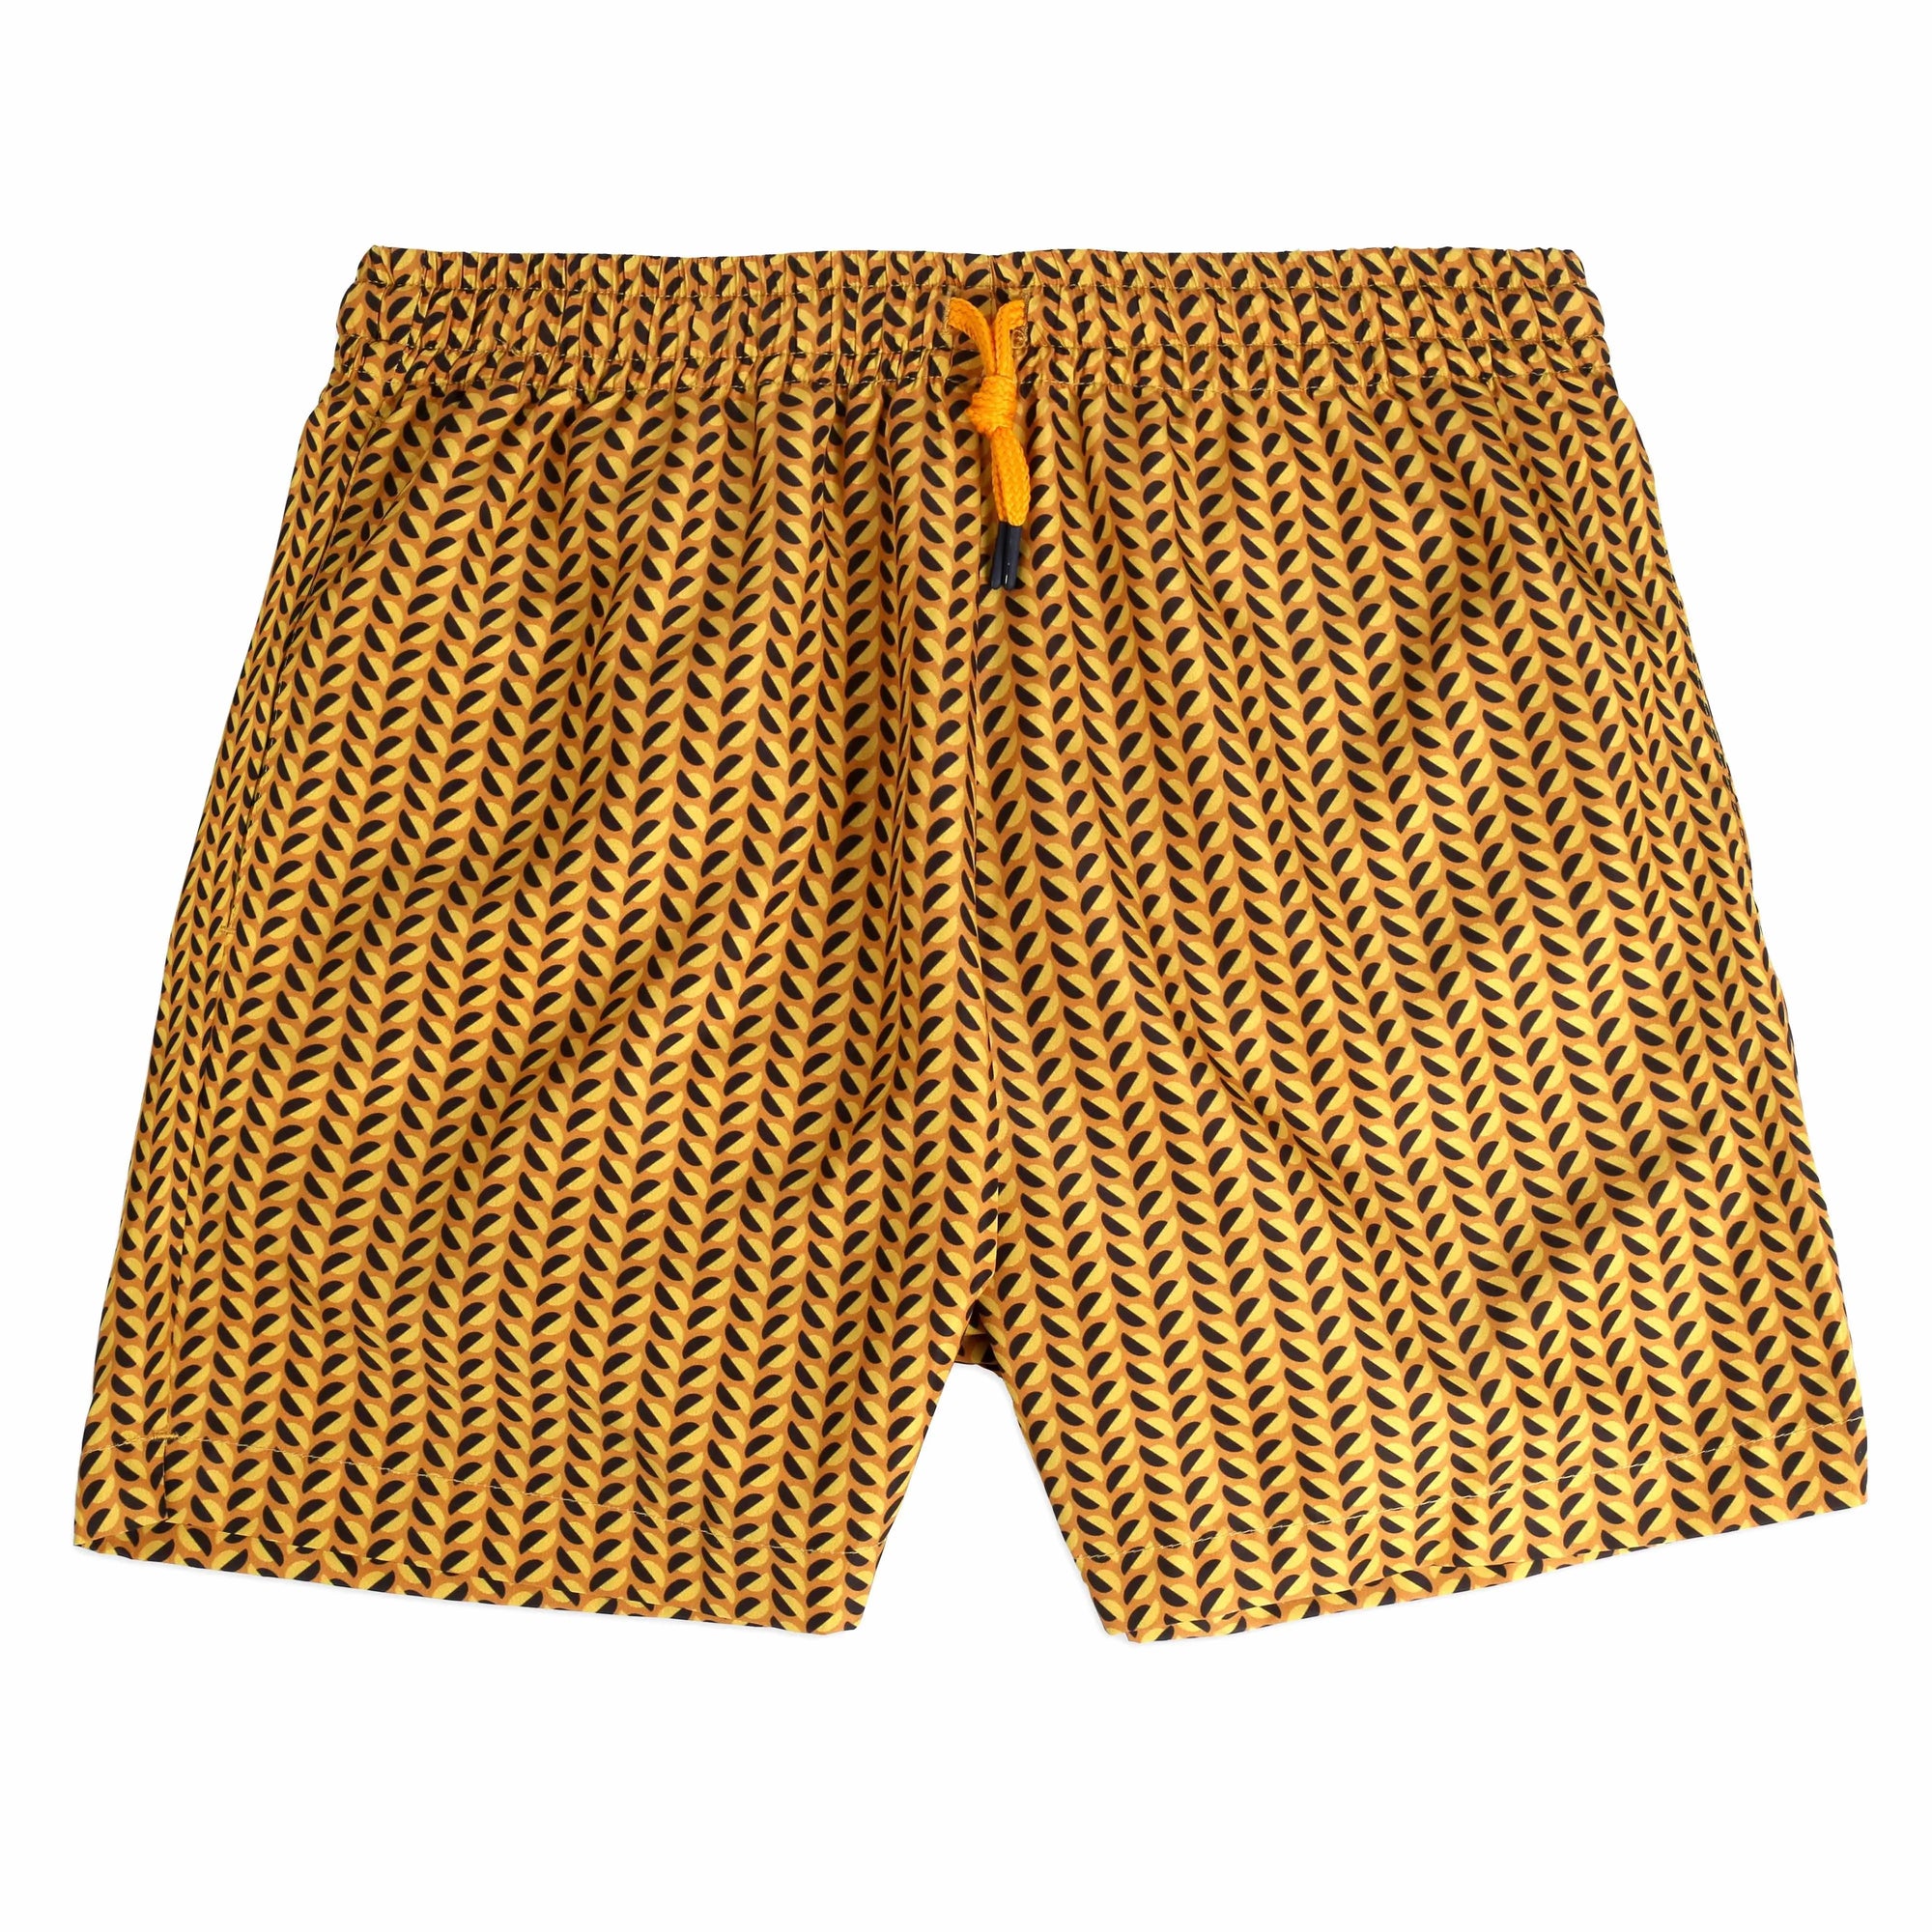 A pair of Clams yellow Swimwear featuring yellow and black leaf-like designs is neatly placed inside an open white box. The box lid, positioned on the left, showcases the brand name "Bassal." An orange cord is also visible, along with a tag featuring the brand name and "bassalstore" from Barcelona.